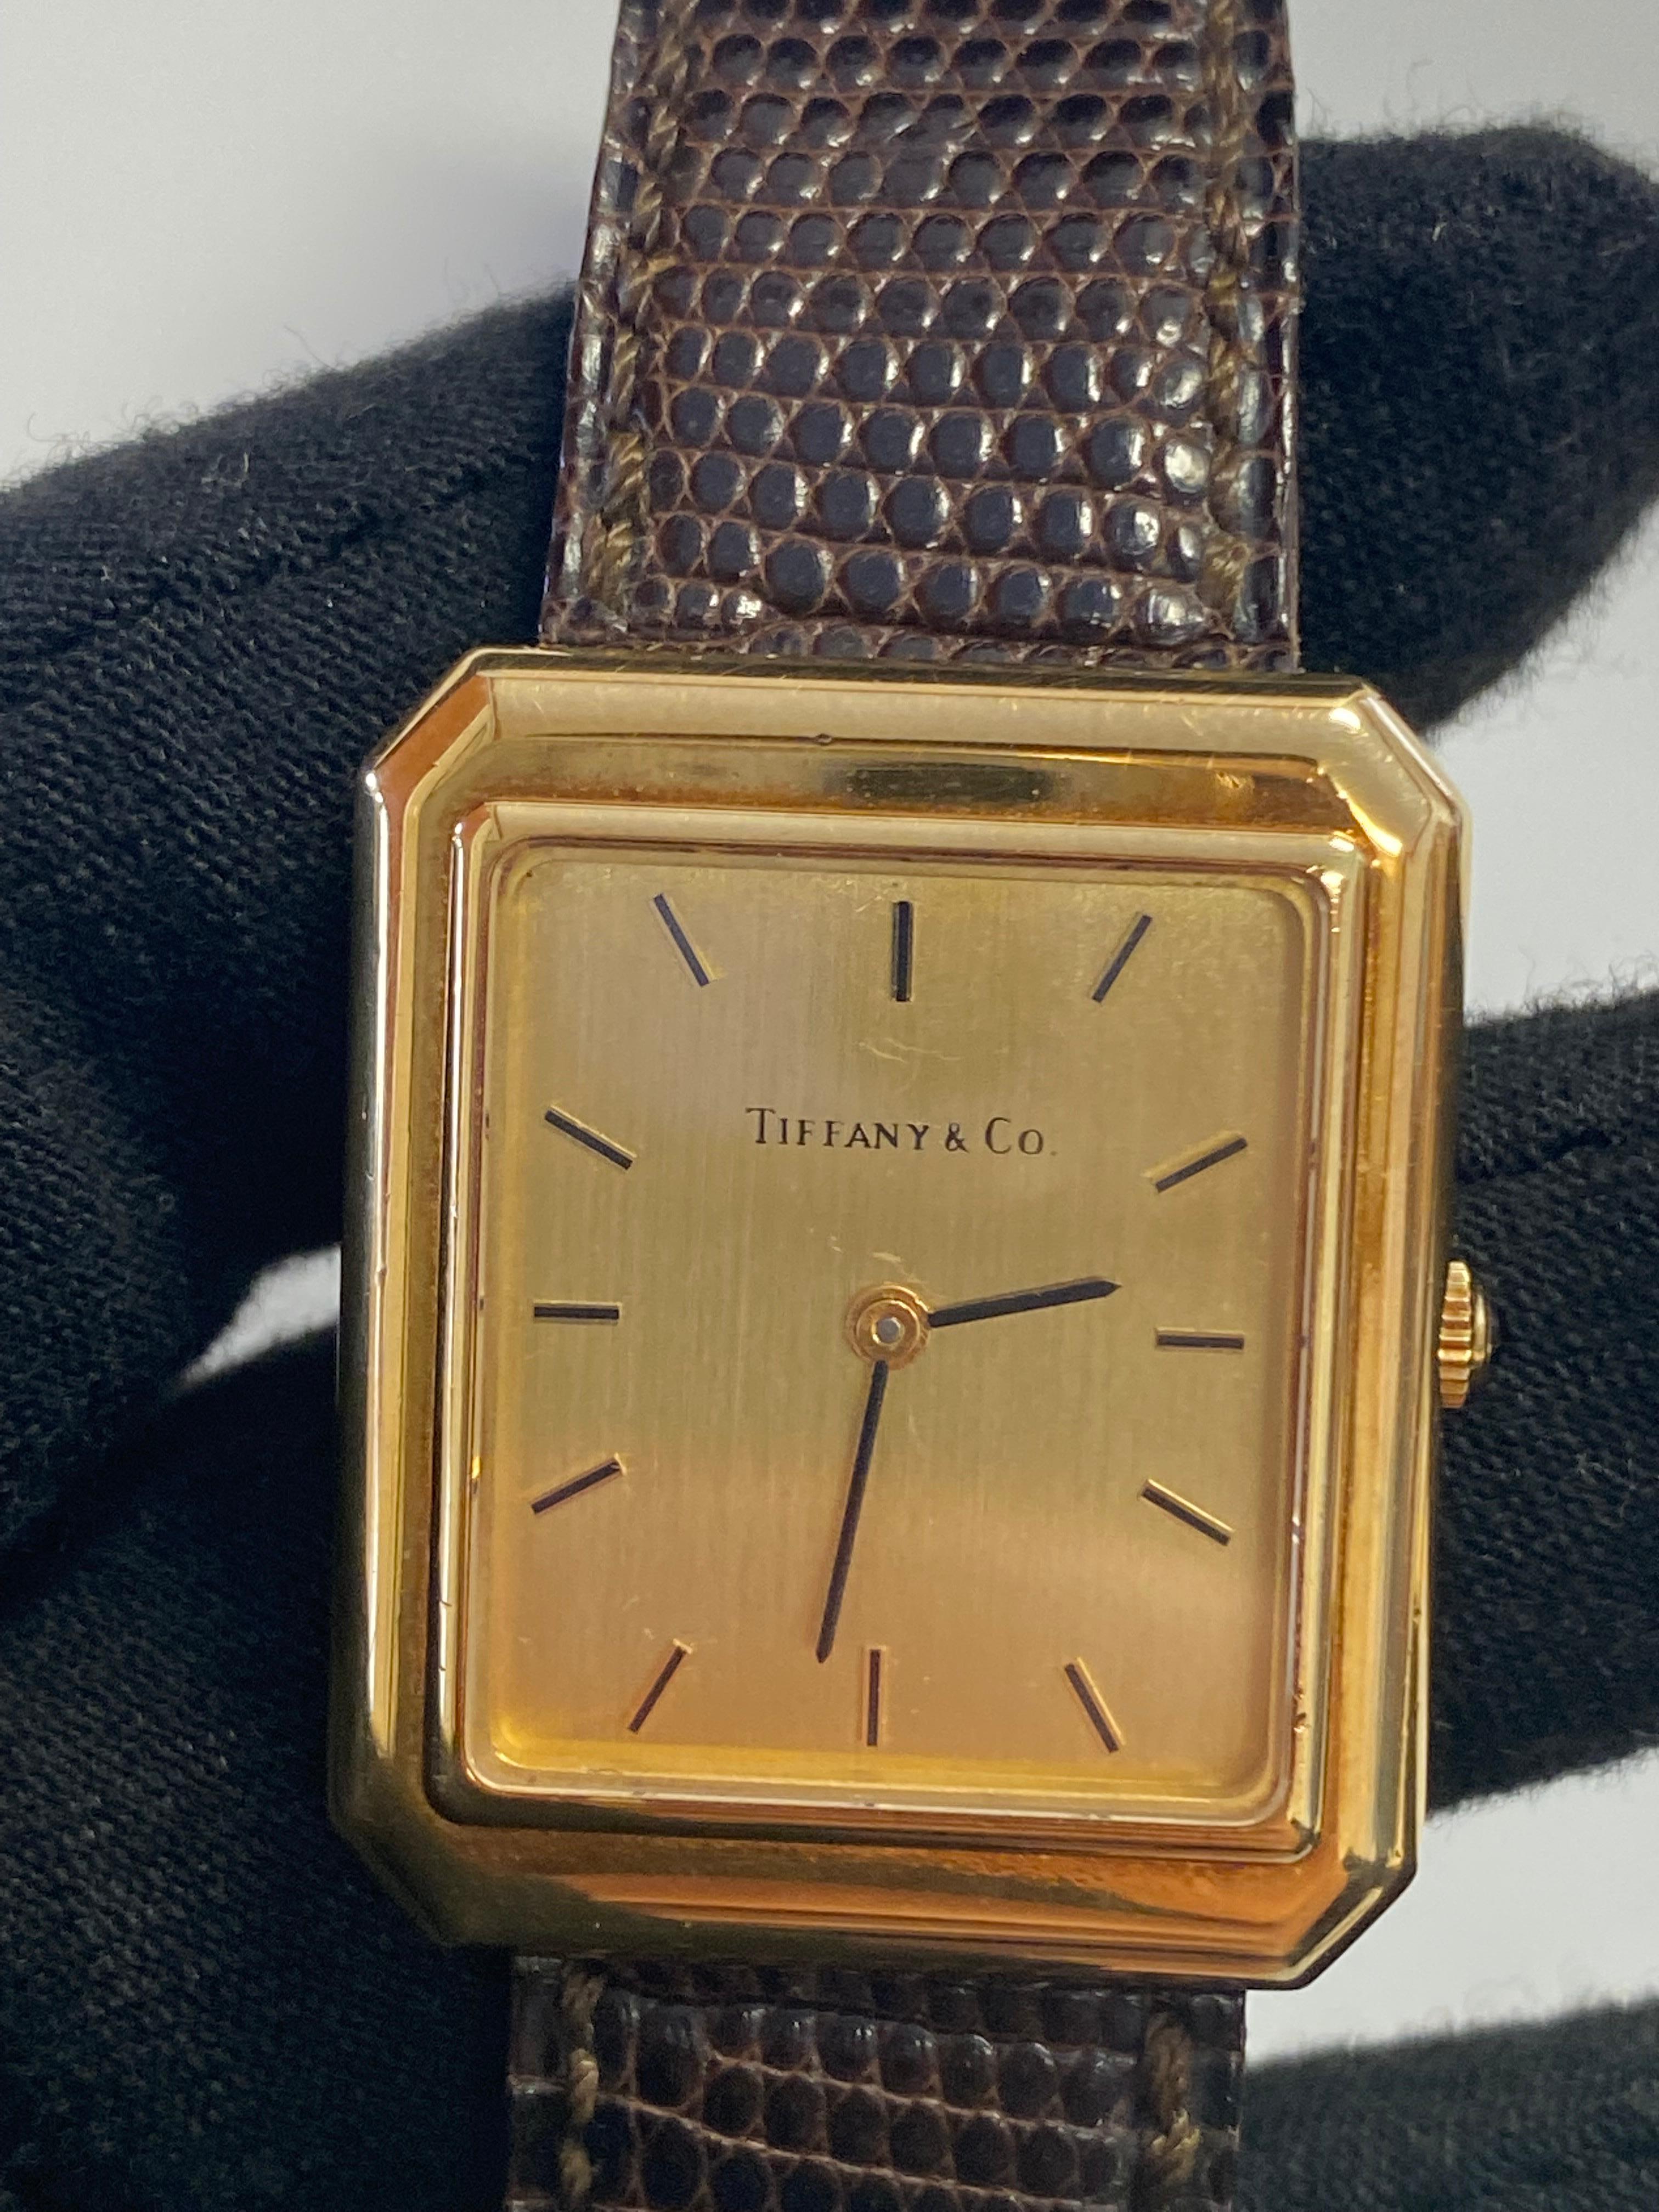 Unisex Tiffany & Co. Rectangular 18k Gold Watch with Original Leather Strap For Sale 2